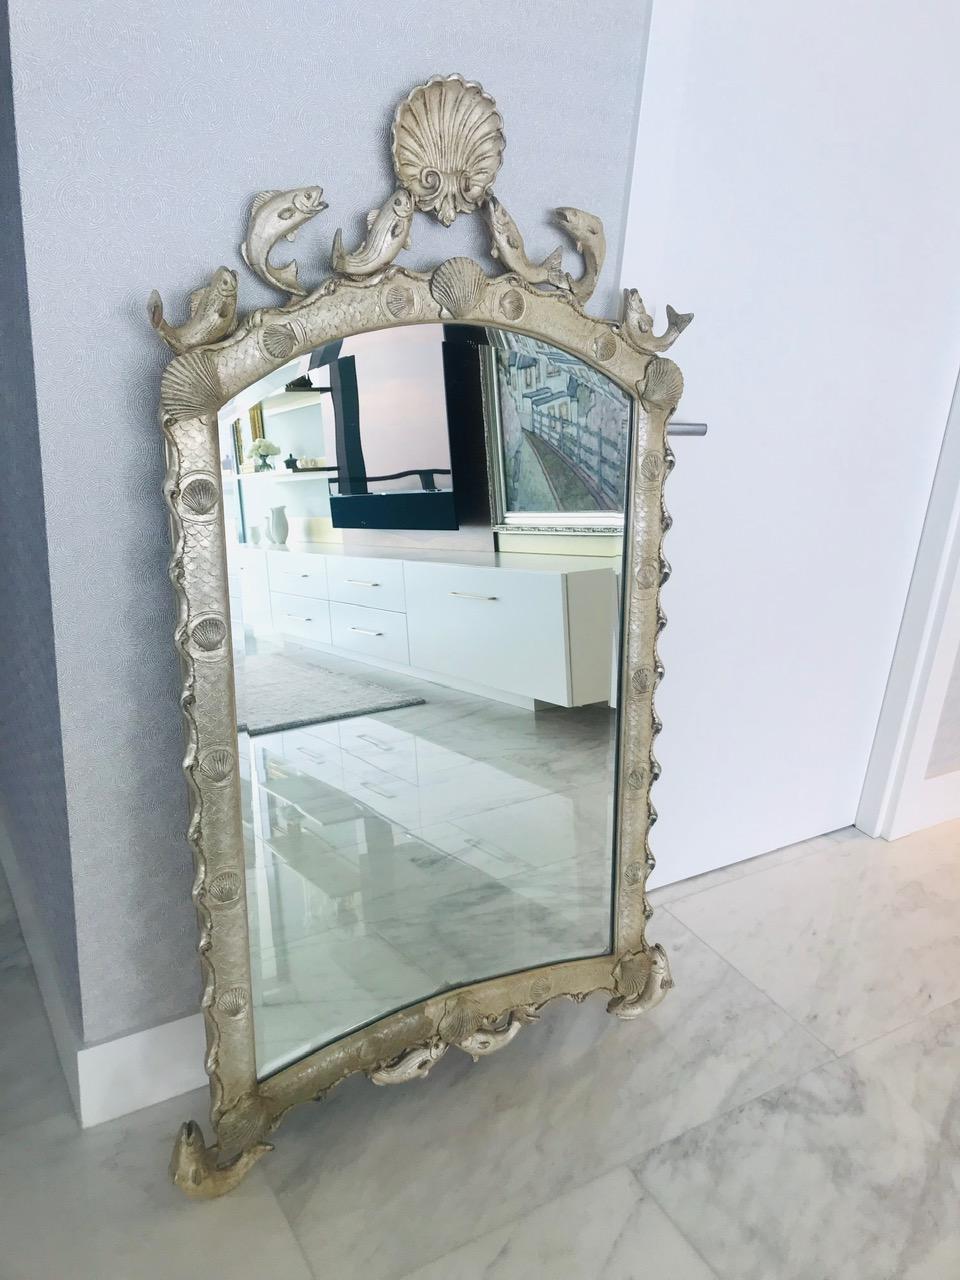 Stunning Venetian style scalloped mirror with ocean sea life theme. The mirror features an arched frame with scalloped borders and with hand laid sterling silver leaf finish. Hand made by artisans using casting technique of wood, resin, and wire to